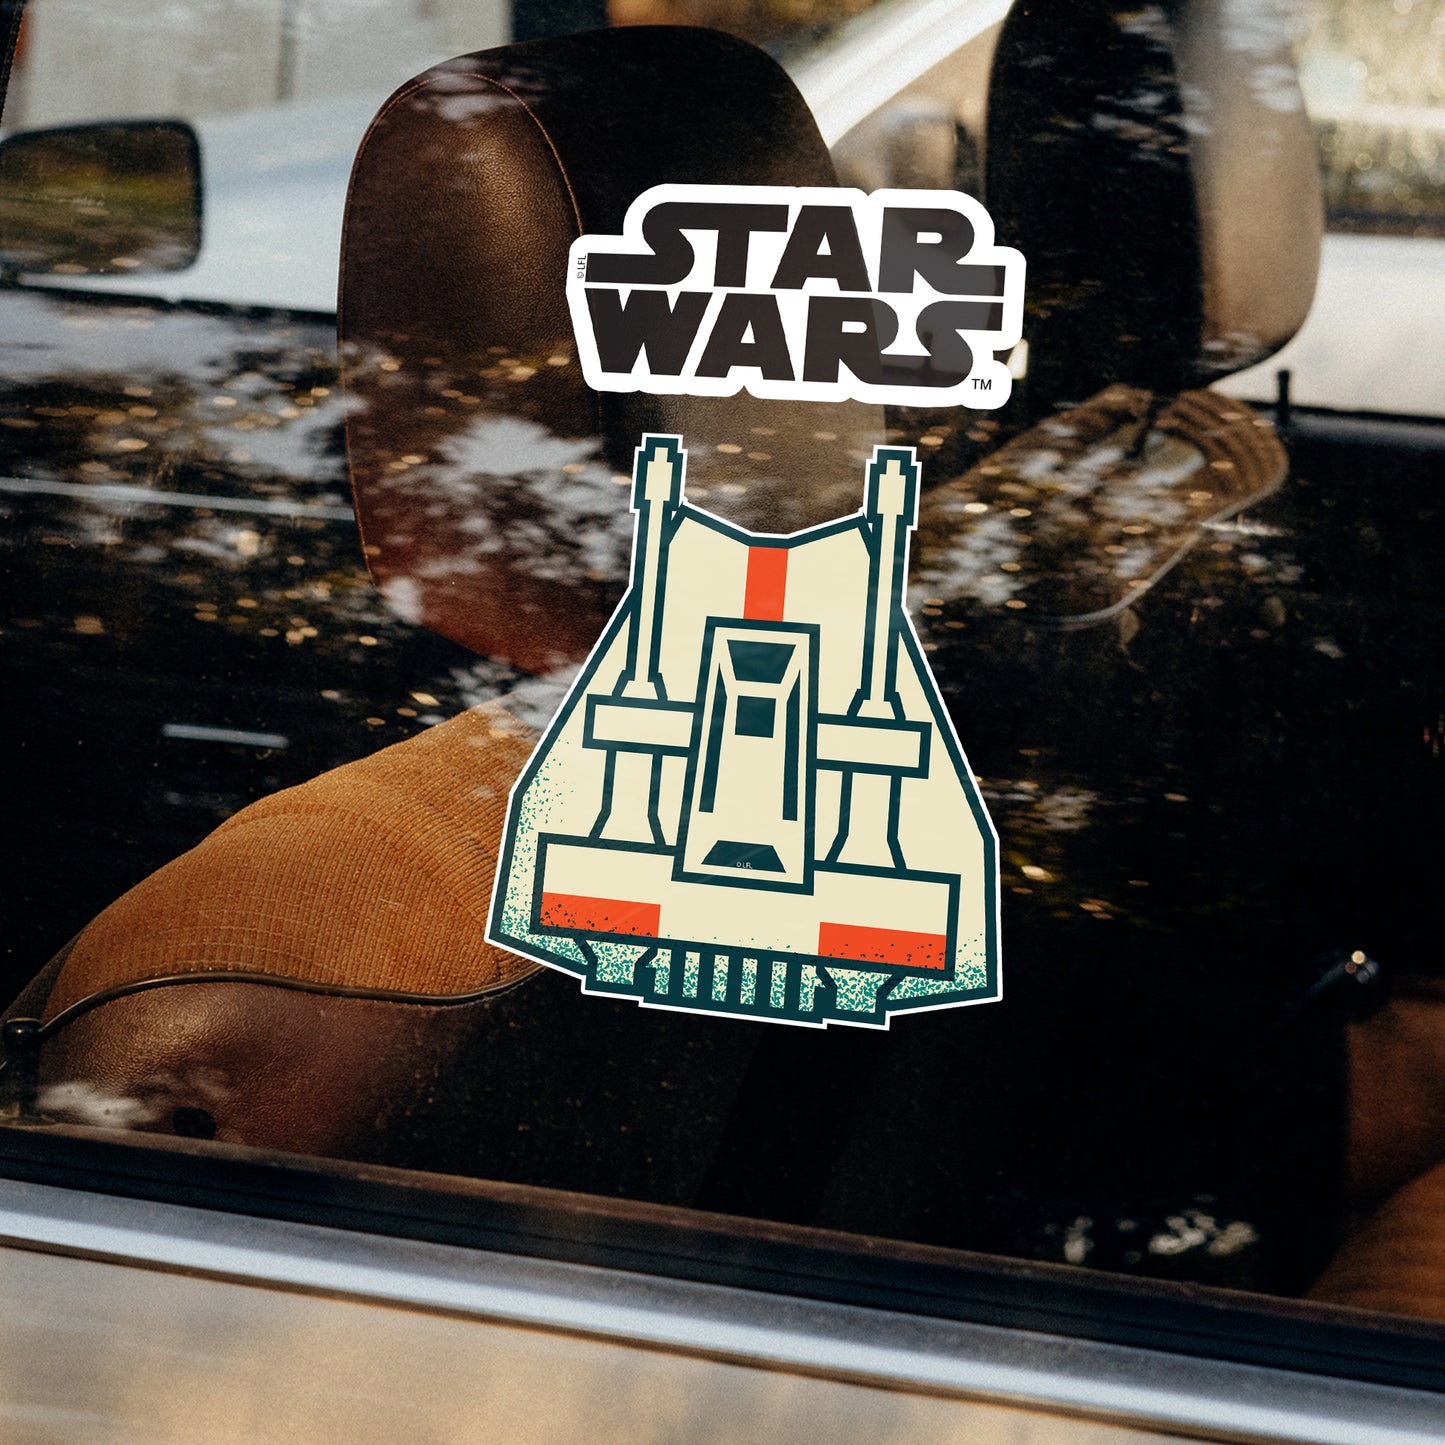 Star Wars: T 47 Snowspeeder Window Clings        - Officially Licensed Disney Removable Window   Static Decal